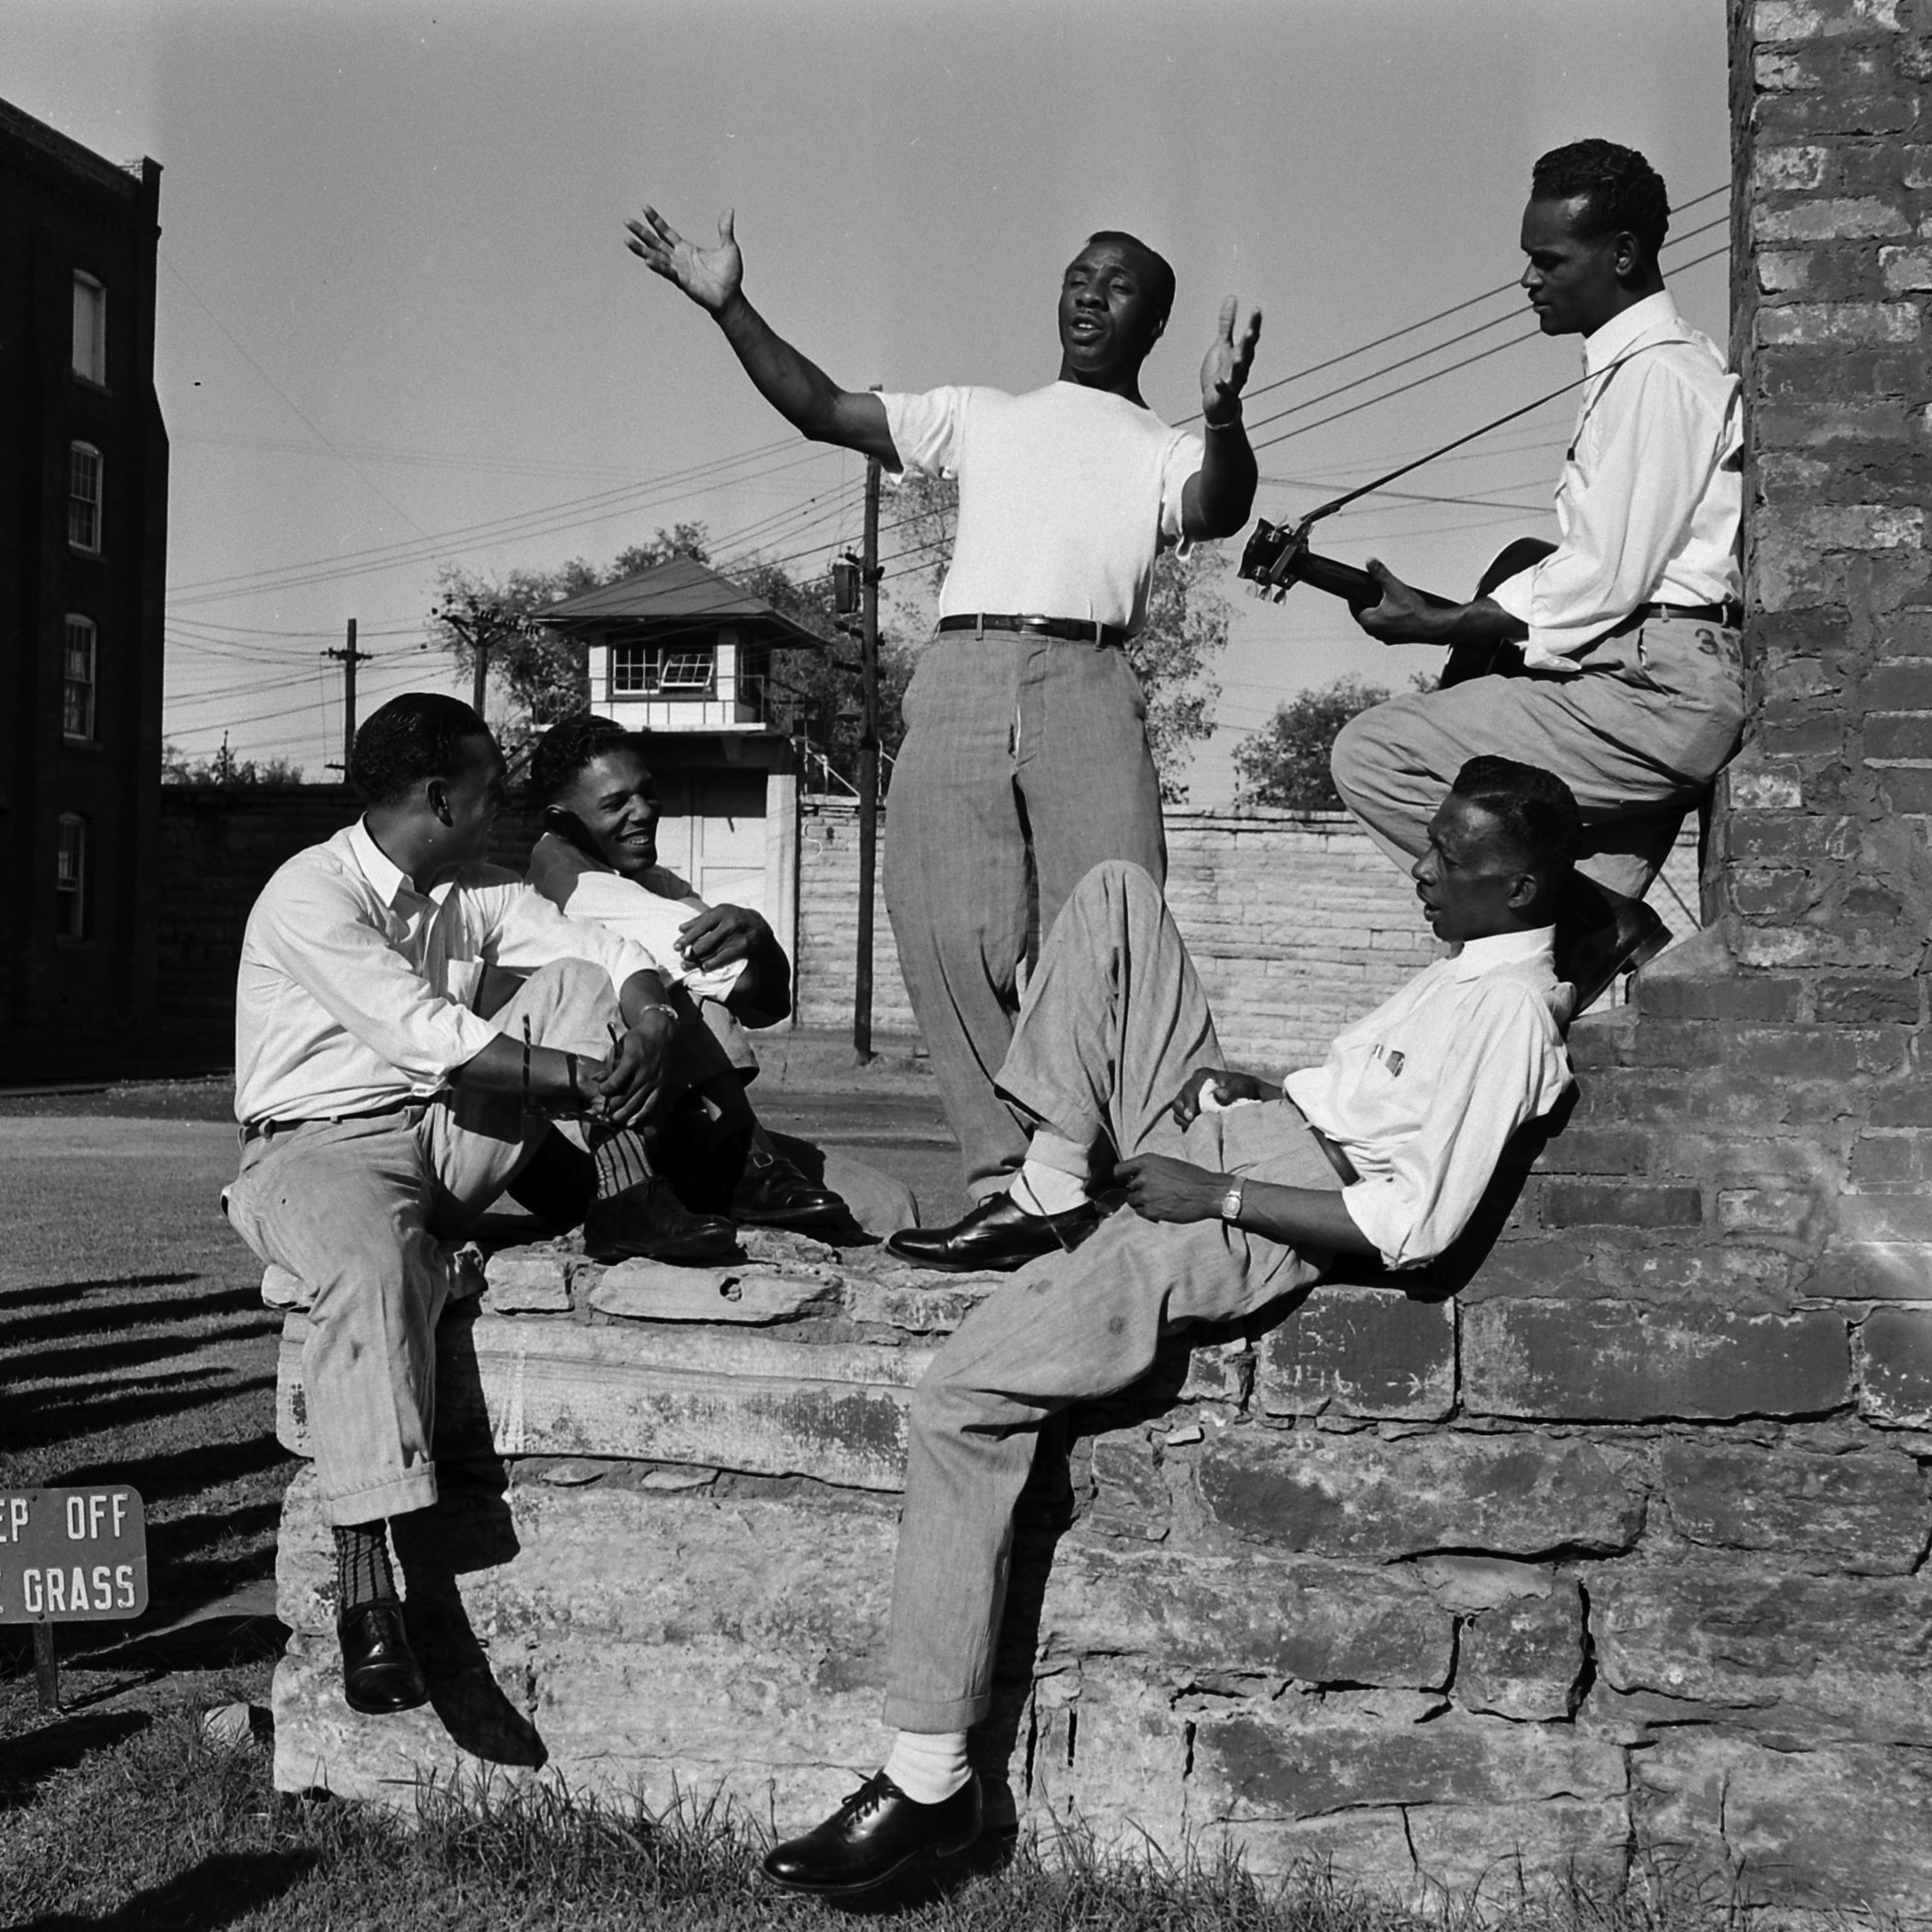 Members of the incarcerated musical group the Prisonaires, Tennessee, 1953.